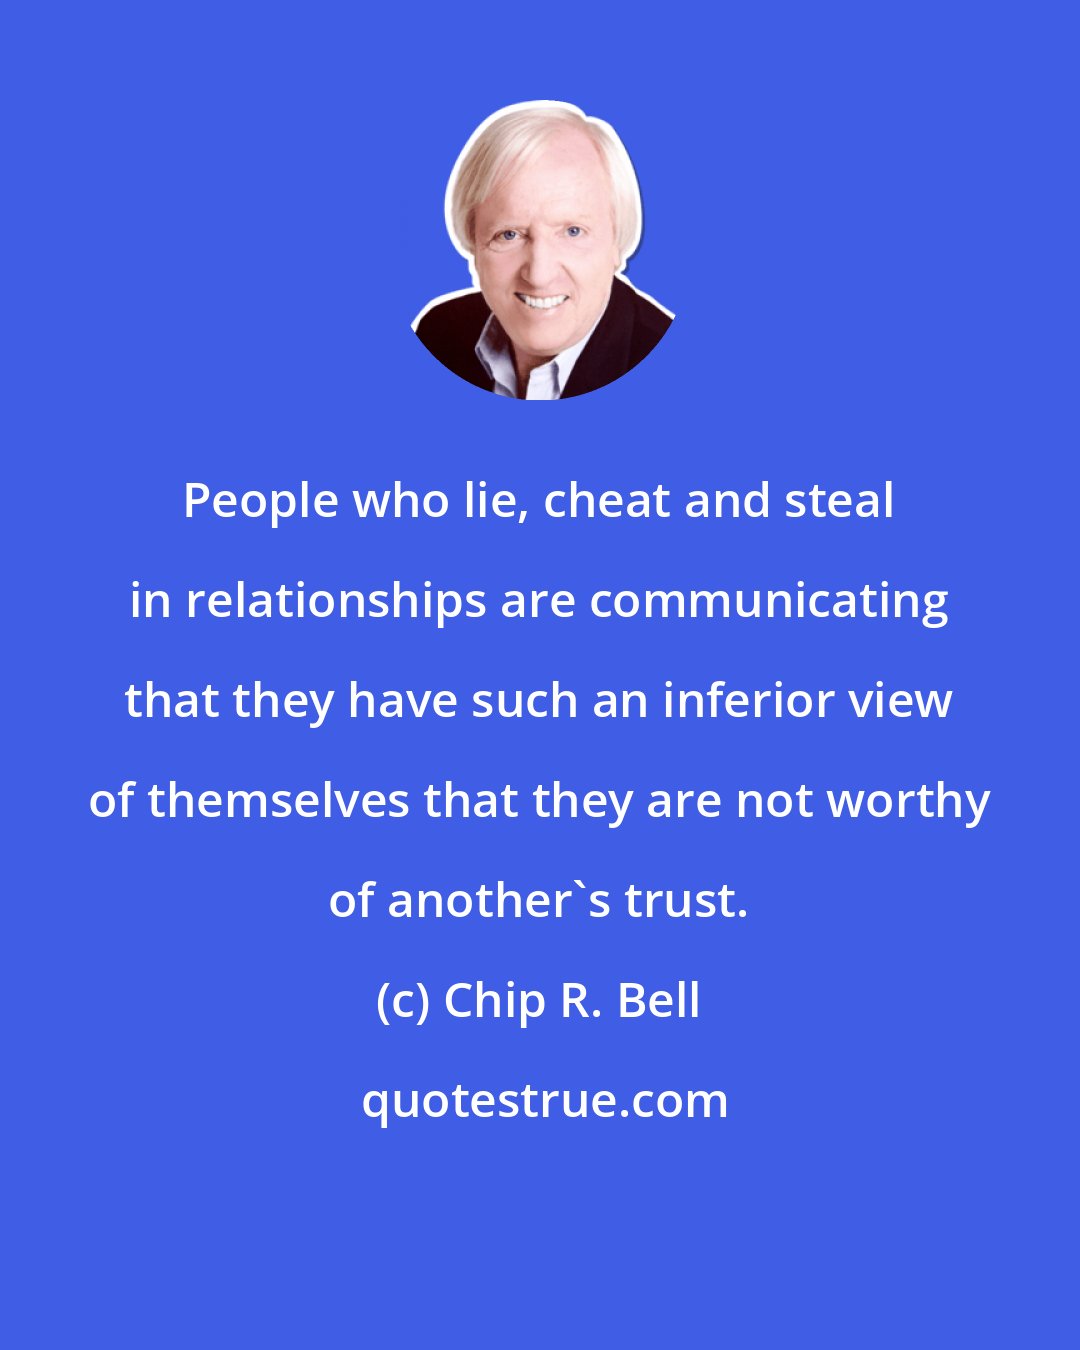 Chip R. Bell: People who lie, cheat and steal in relationships are communicating that they have such an inferior view of themselves that they are not worthy of another's trust.